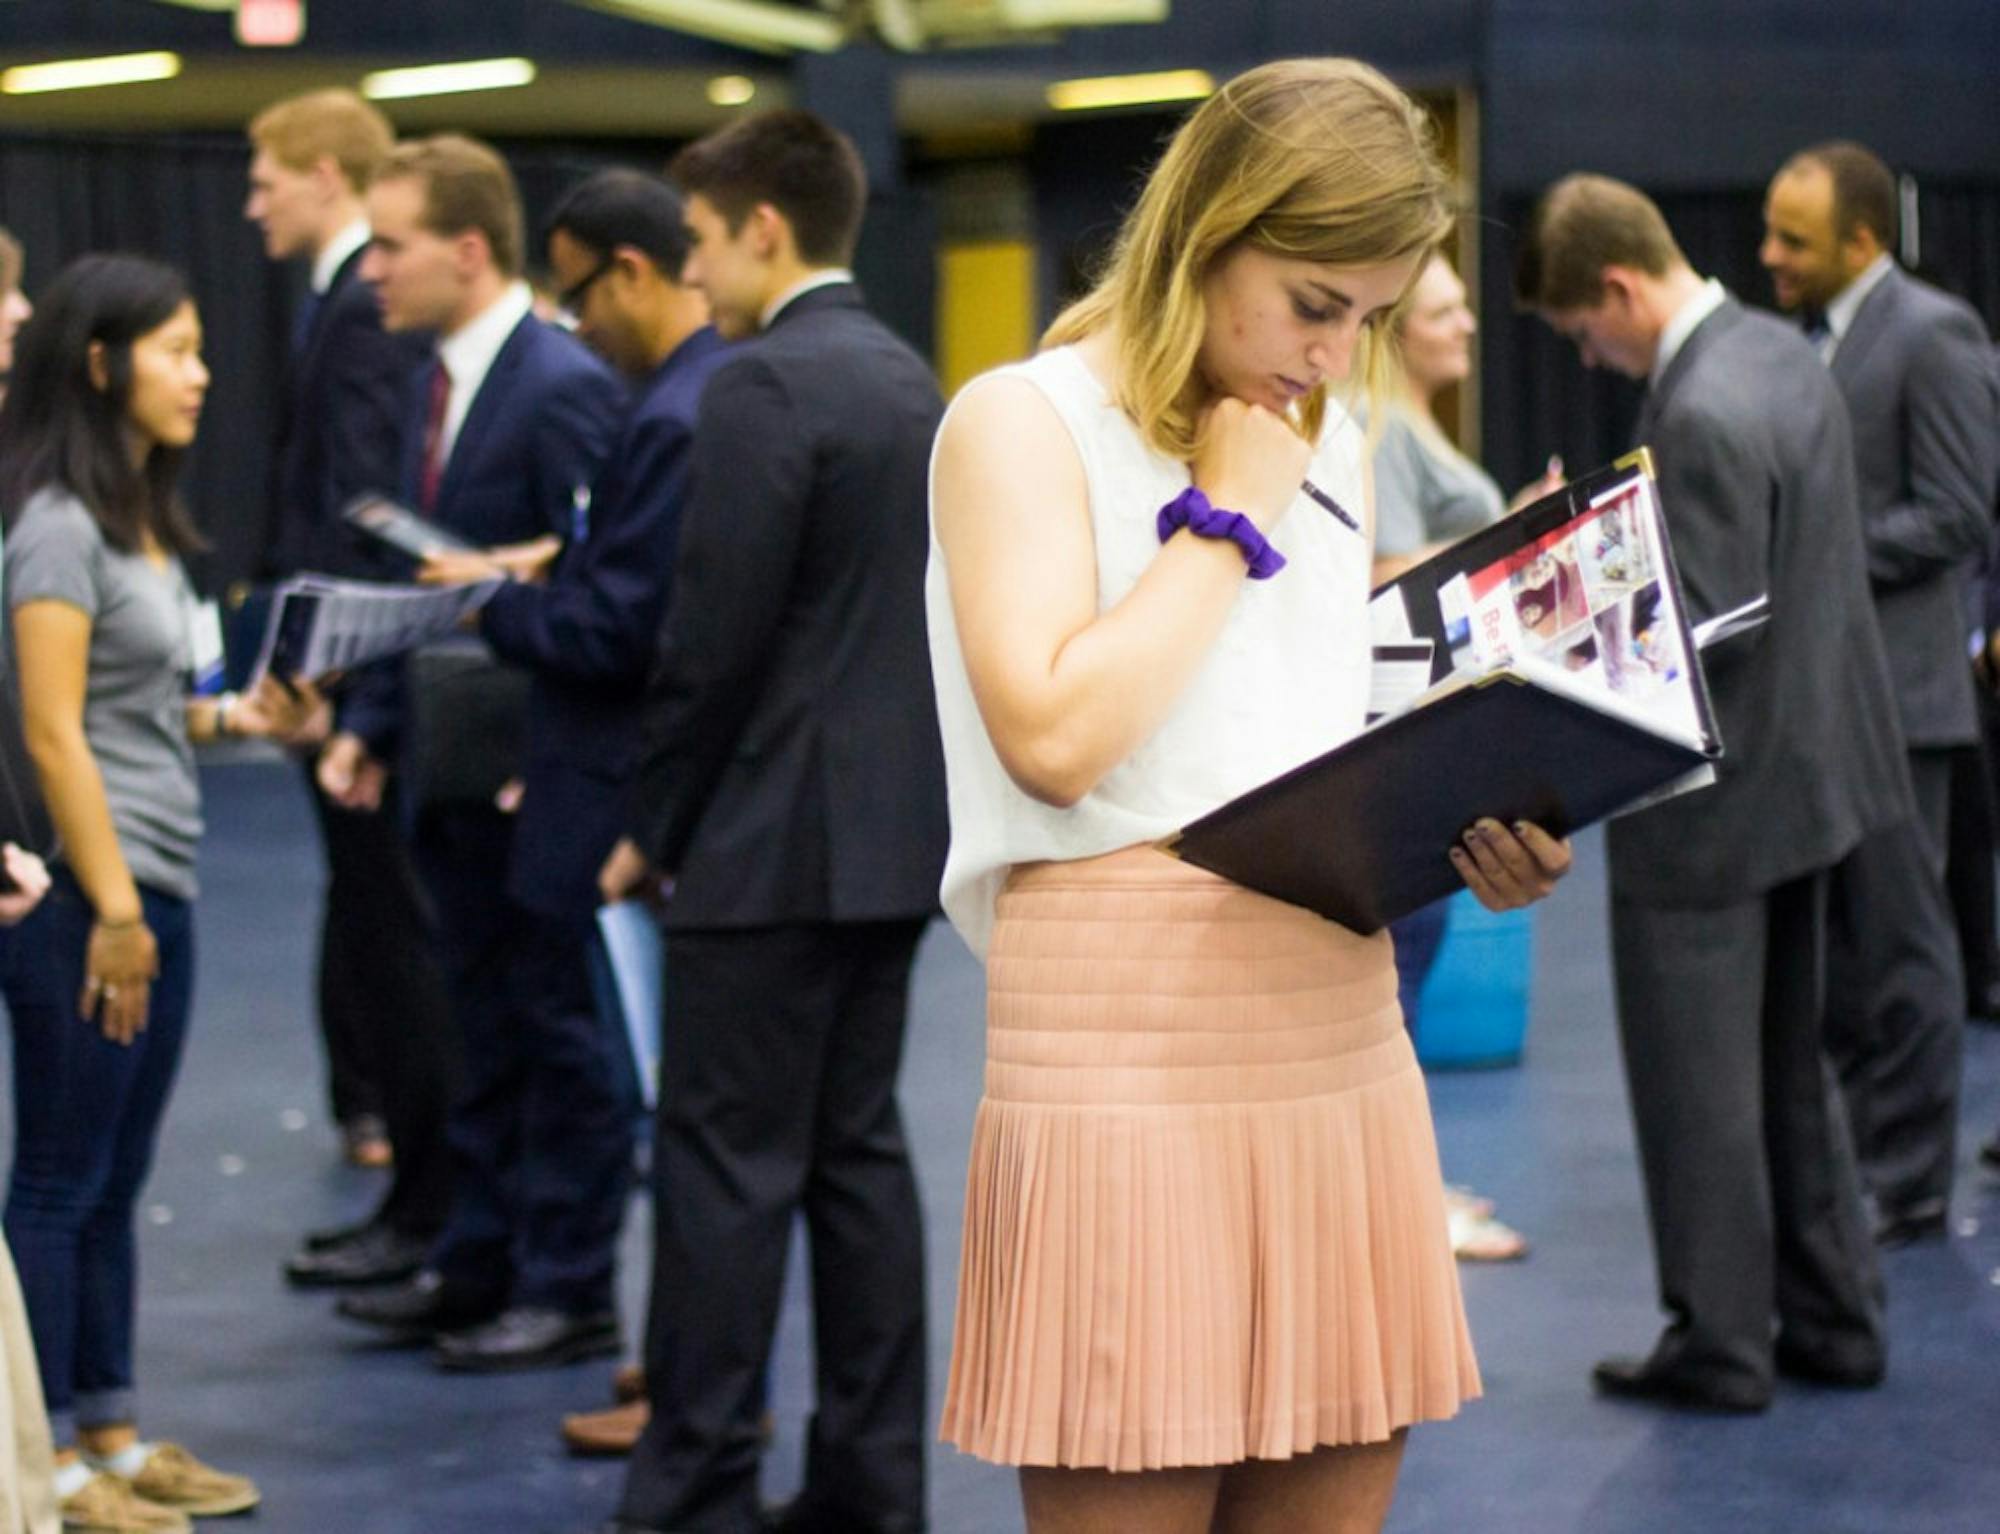 A student reviews informational brochures provided by visiting companies at the Fall Career Expo. The Expo, held in the Joyce Fieldhouse, allowed students to meet and interact with prospective employers.